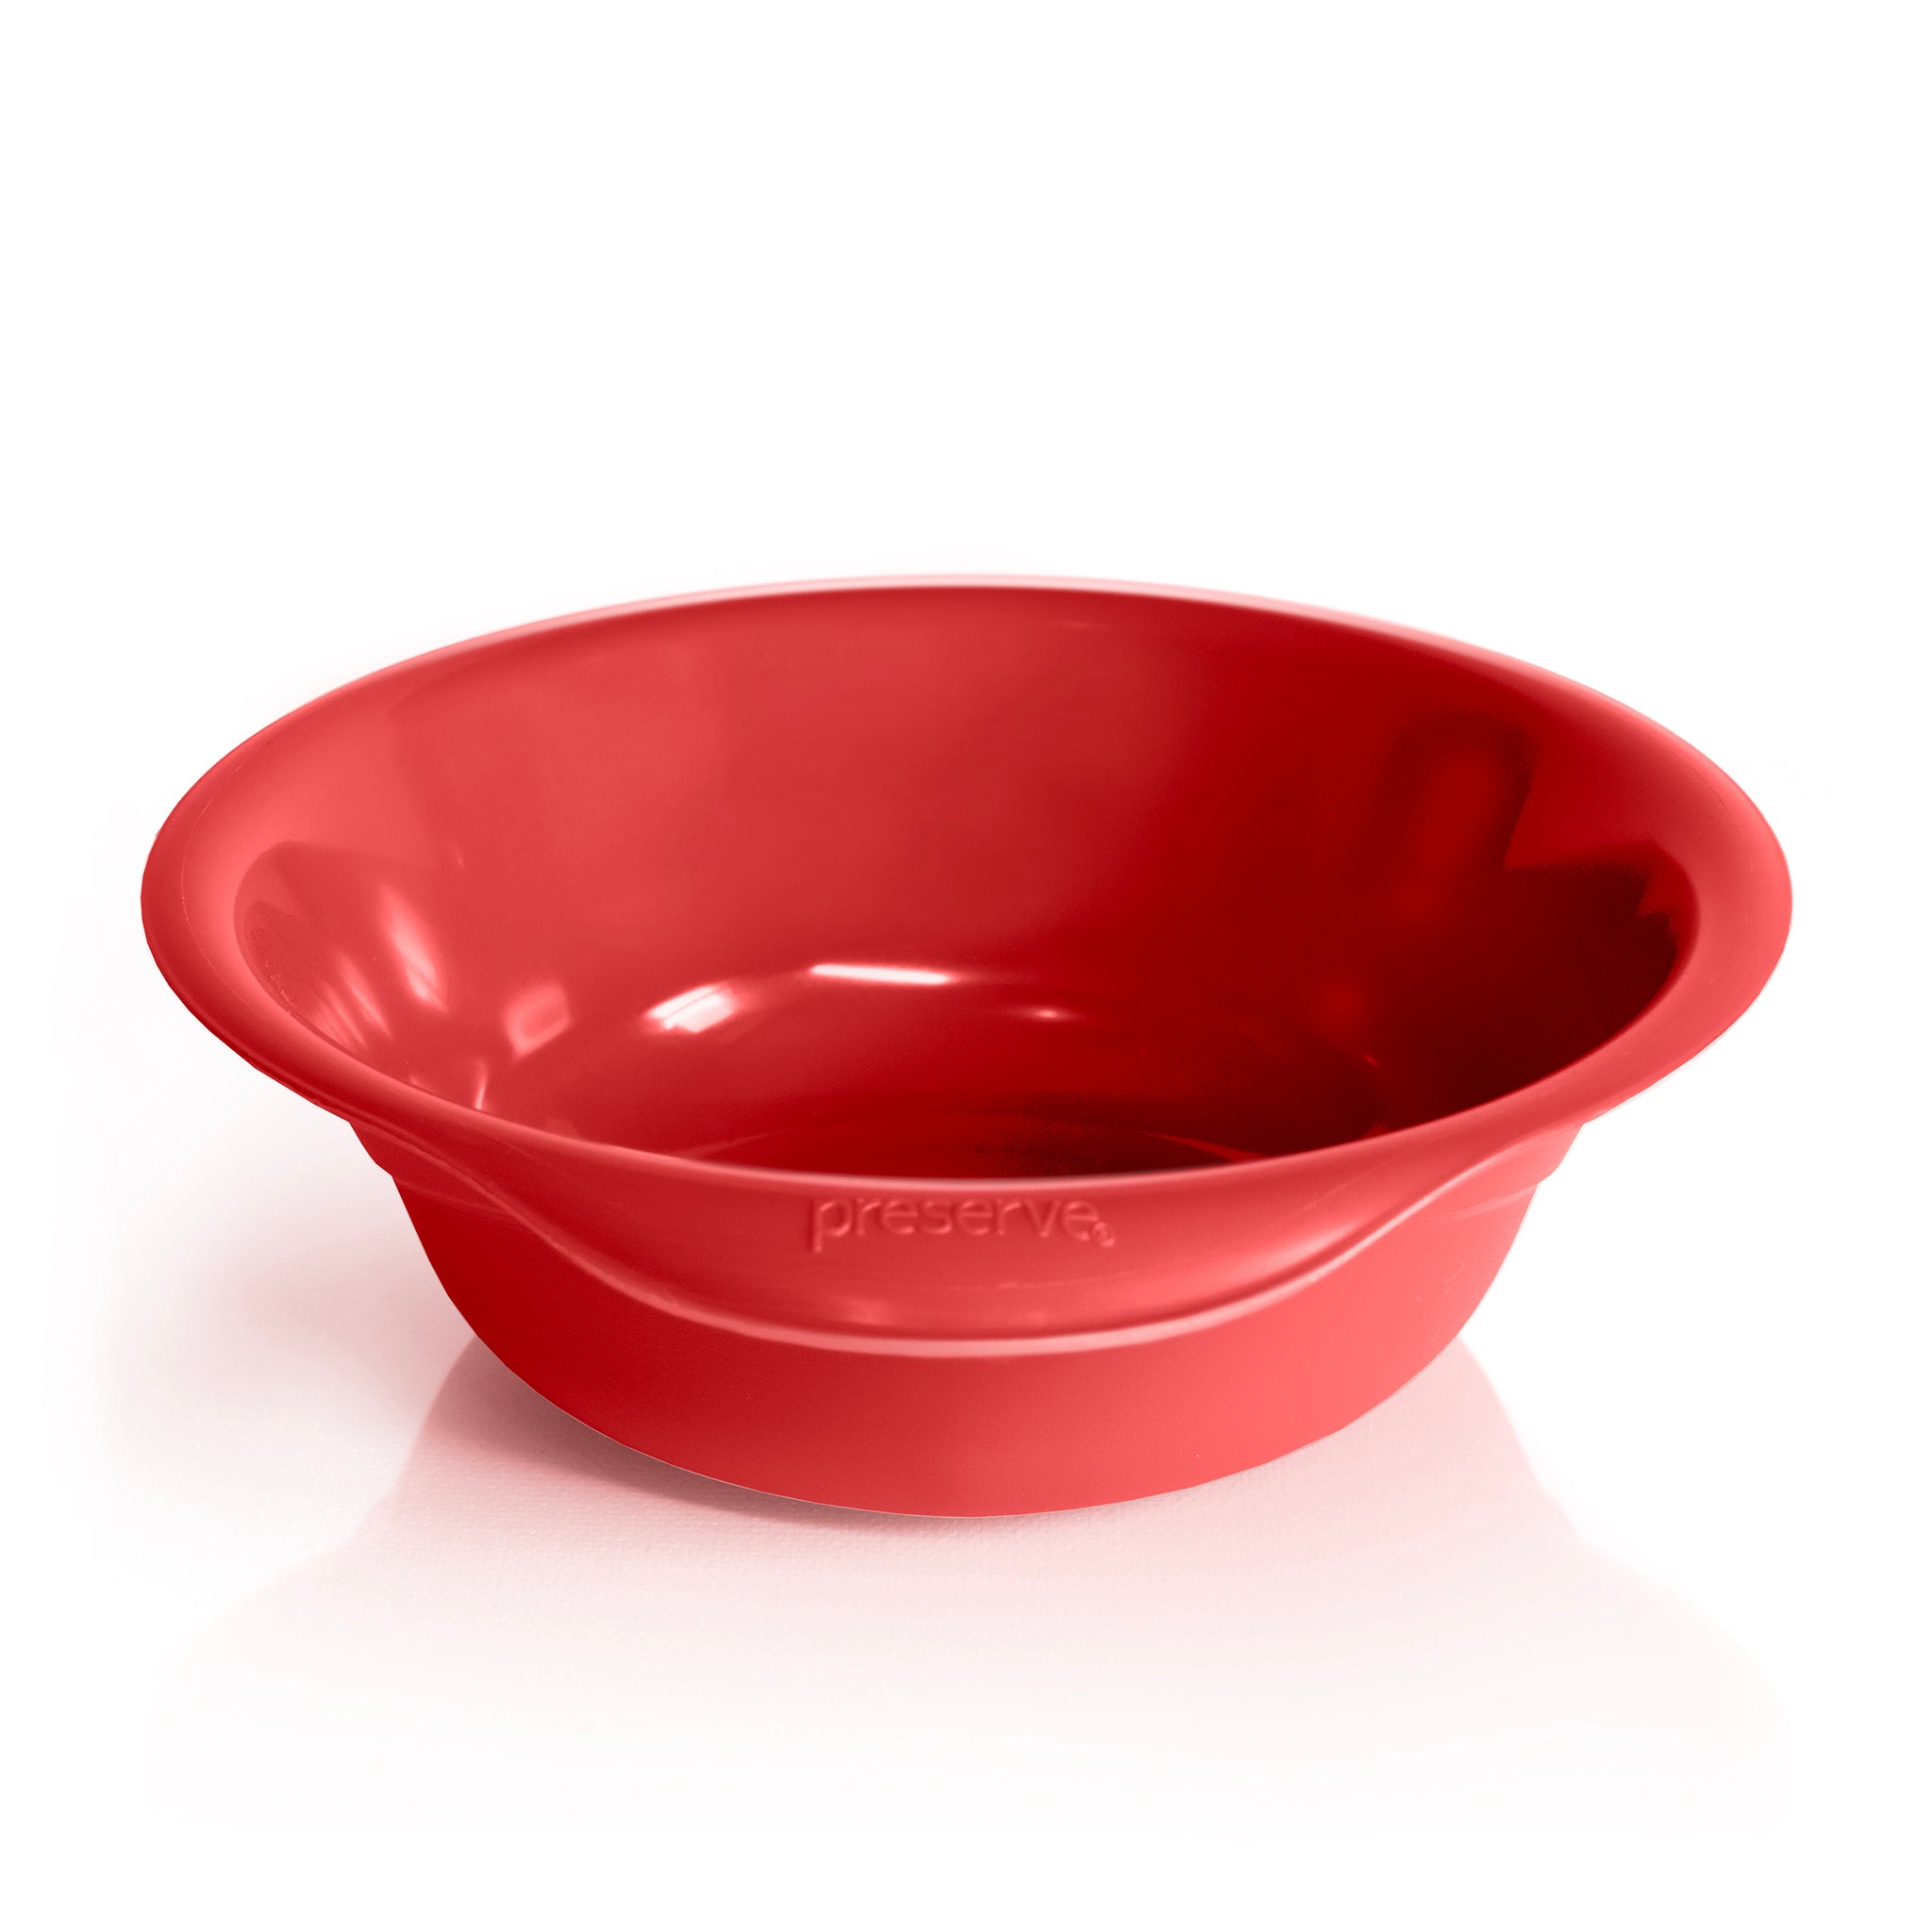 Red pepper recycled plastic bowl